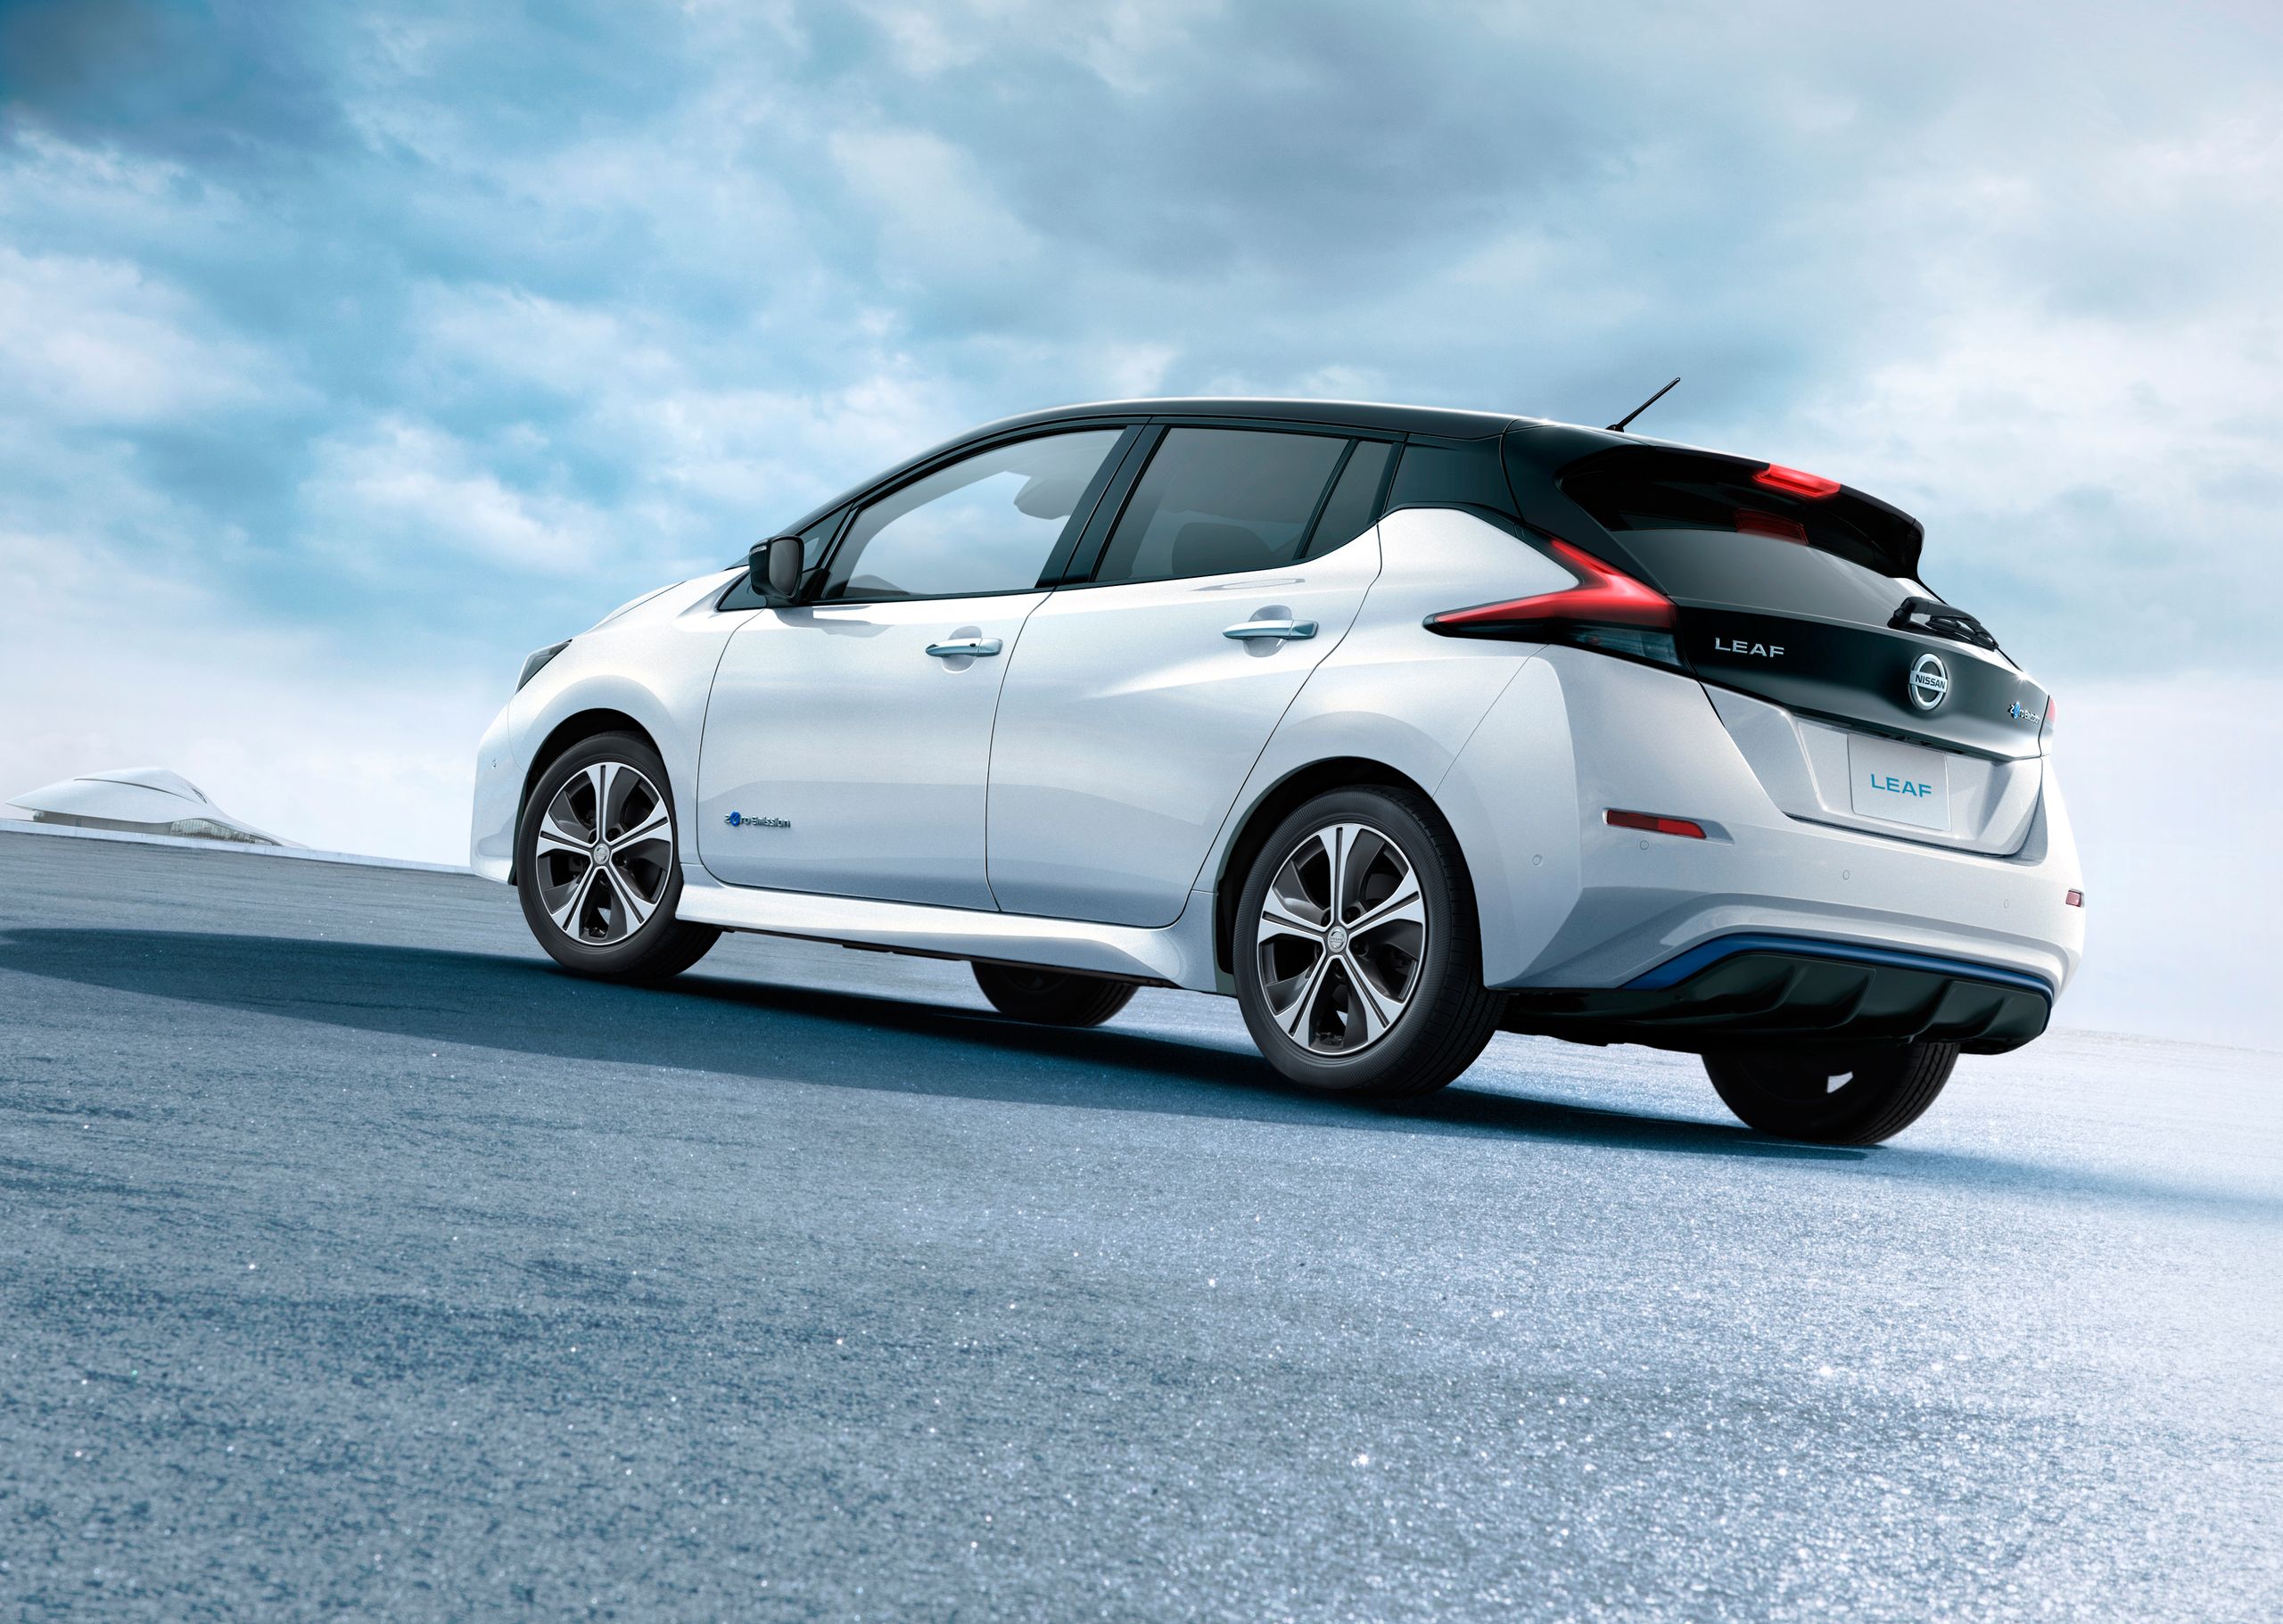 Nissan Leaf Wallpaper Galore Own It In January On